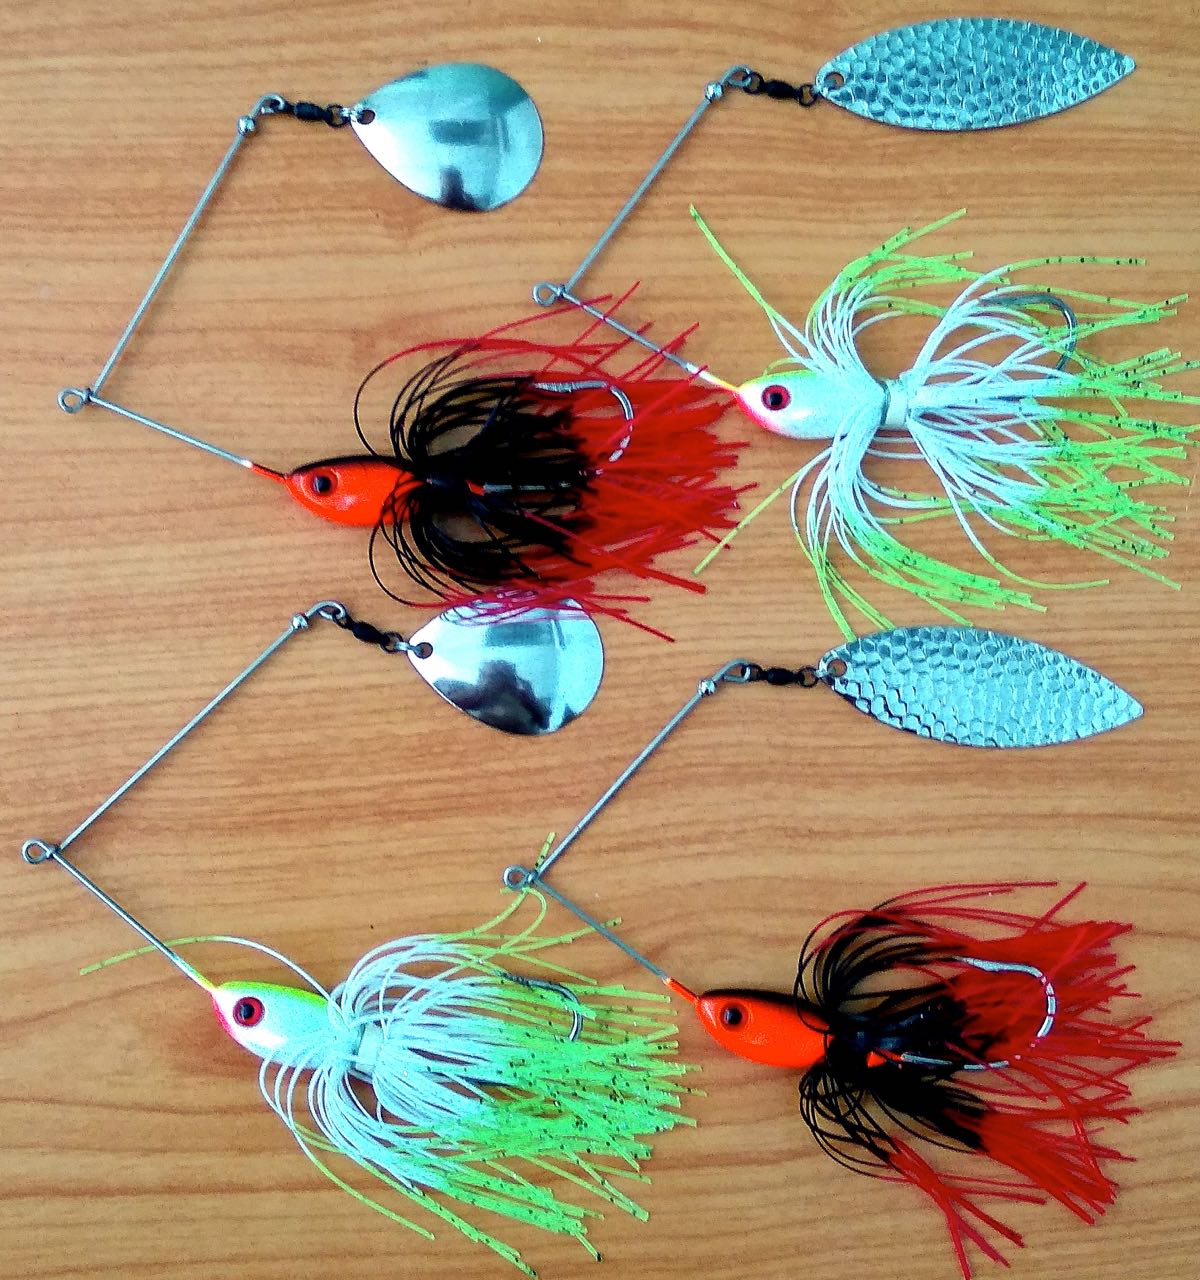 Willow leaf and Colorado blade spinnerbaits